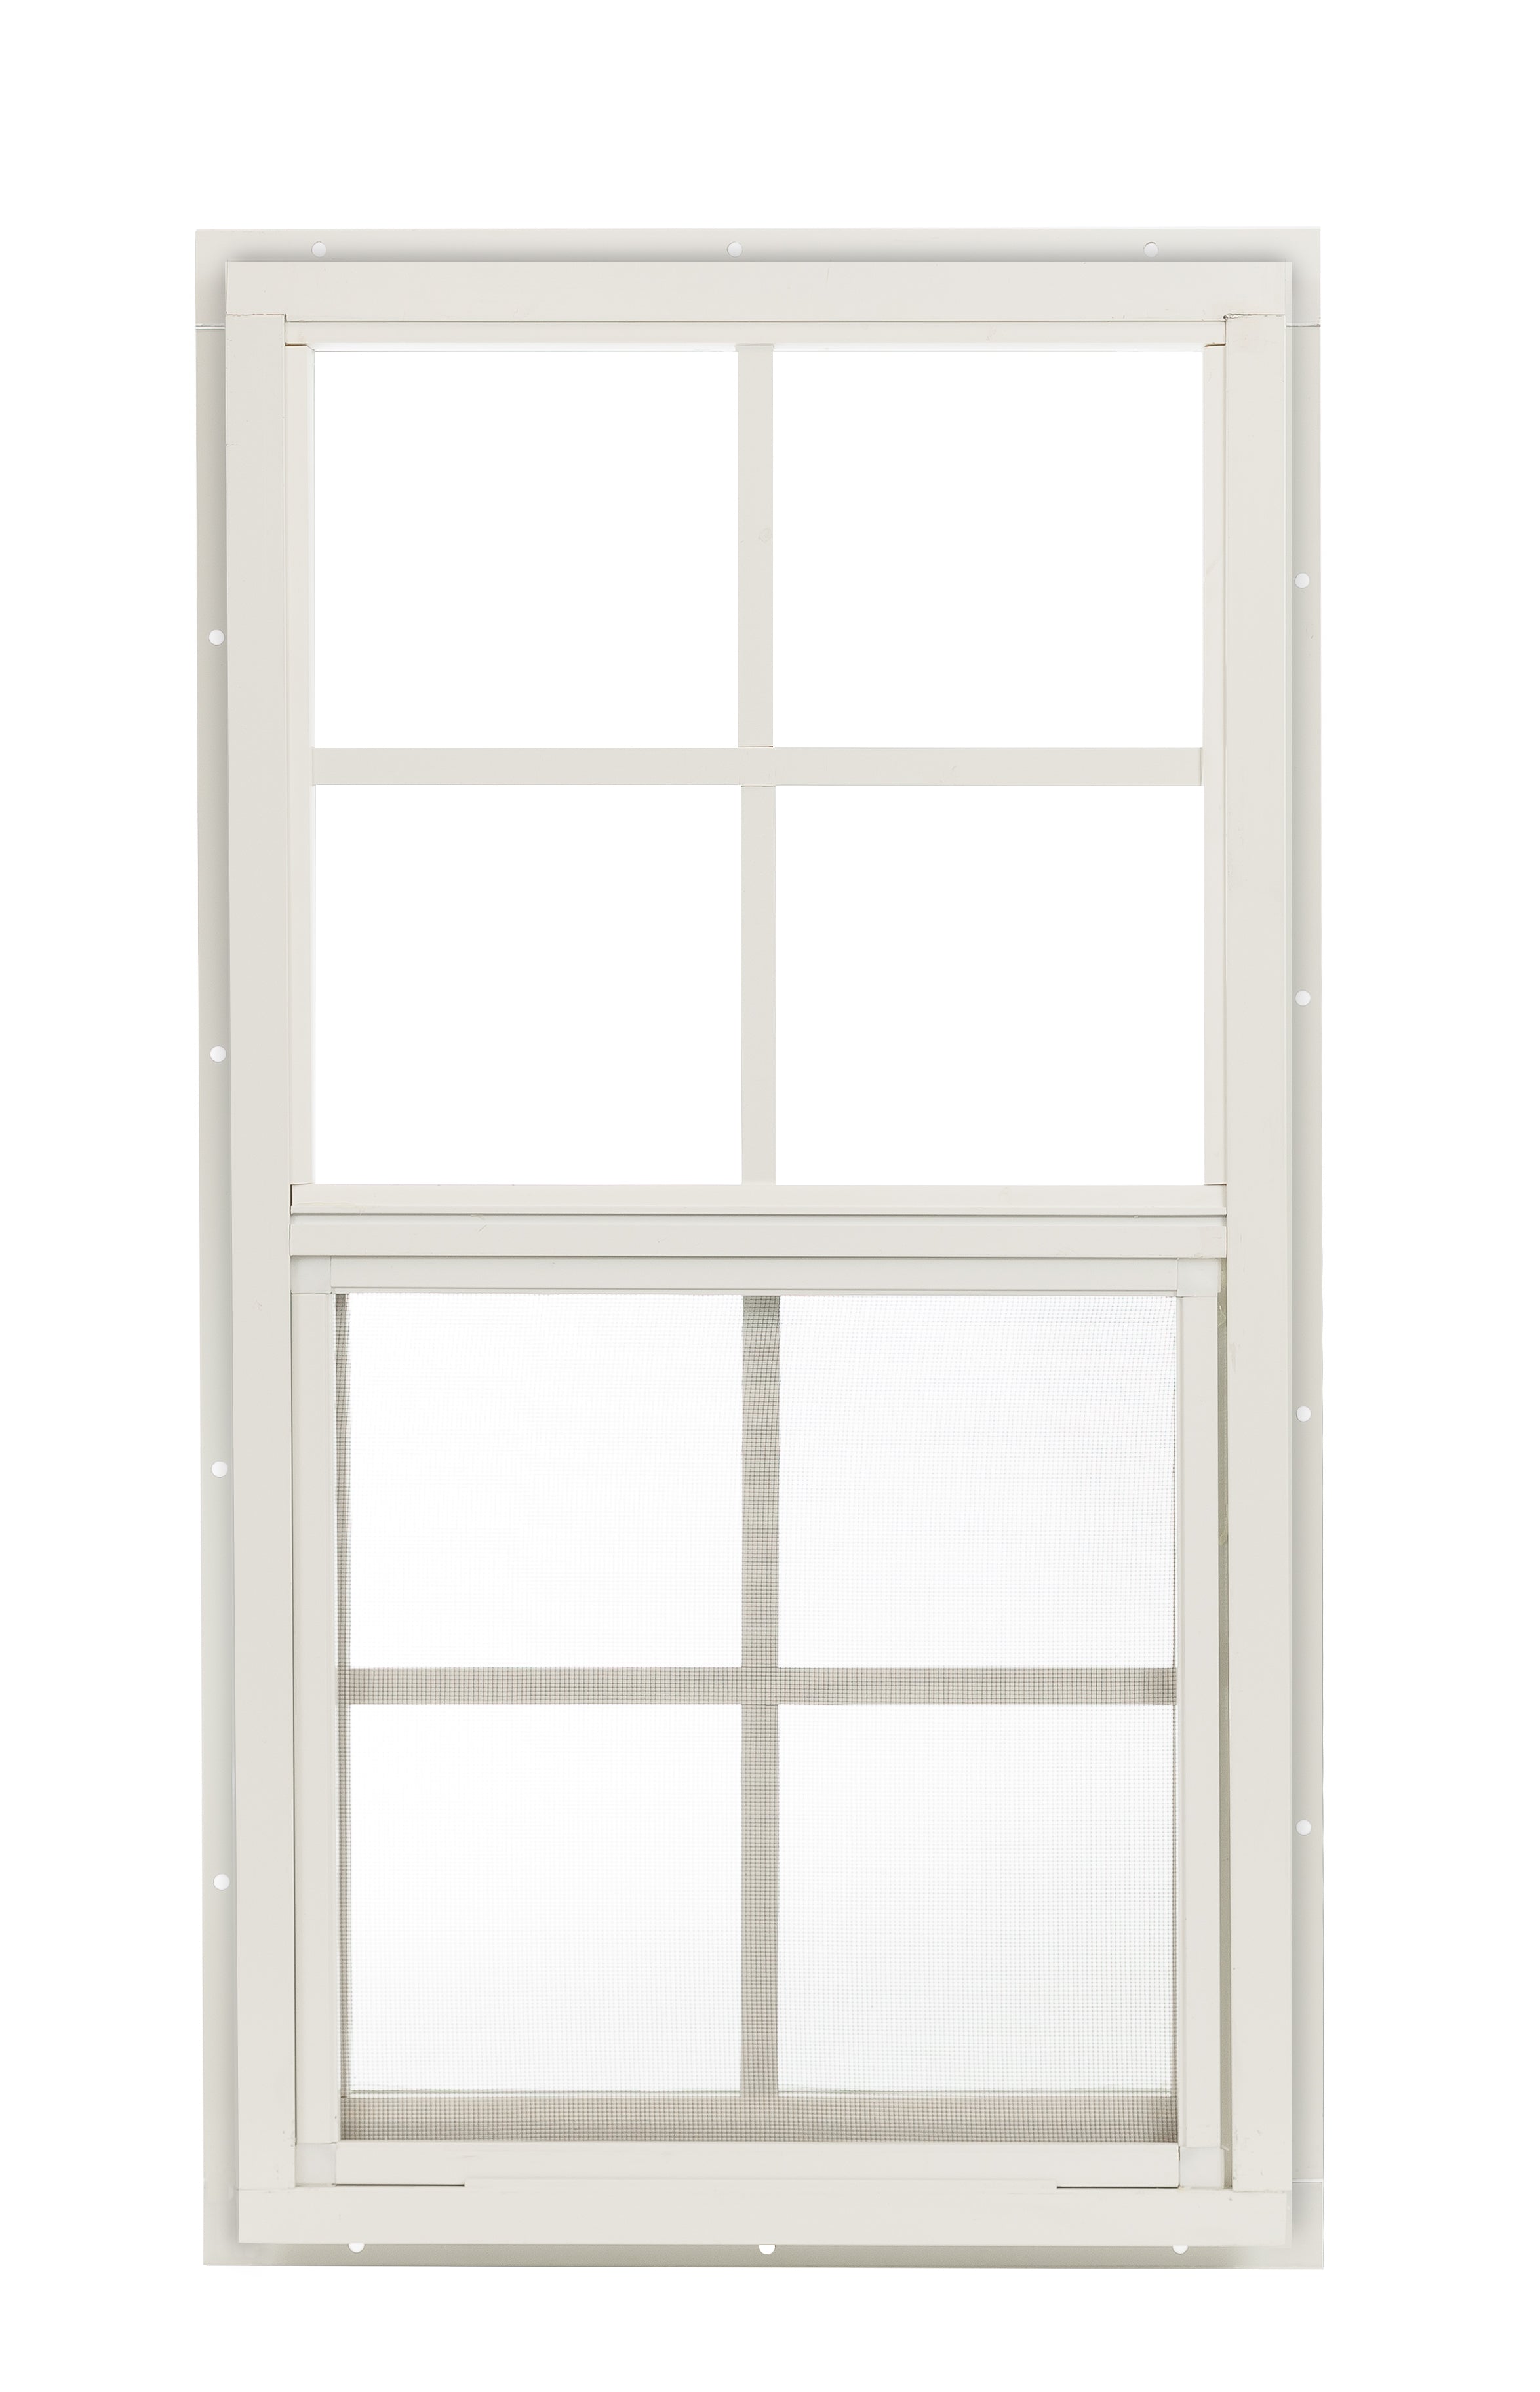 14" W x 27" H Single Hung J-Lap Mount White Window for Sheds, Playhouses, and MORE